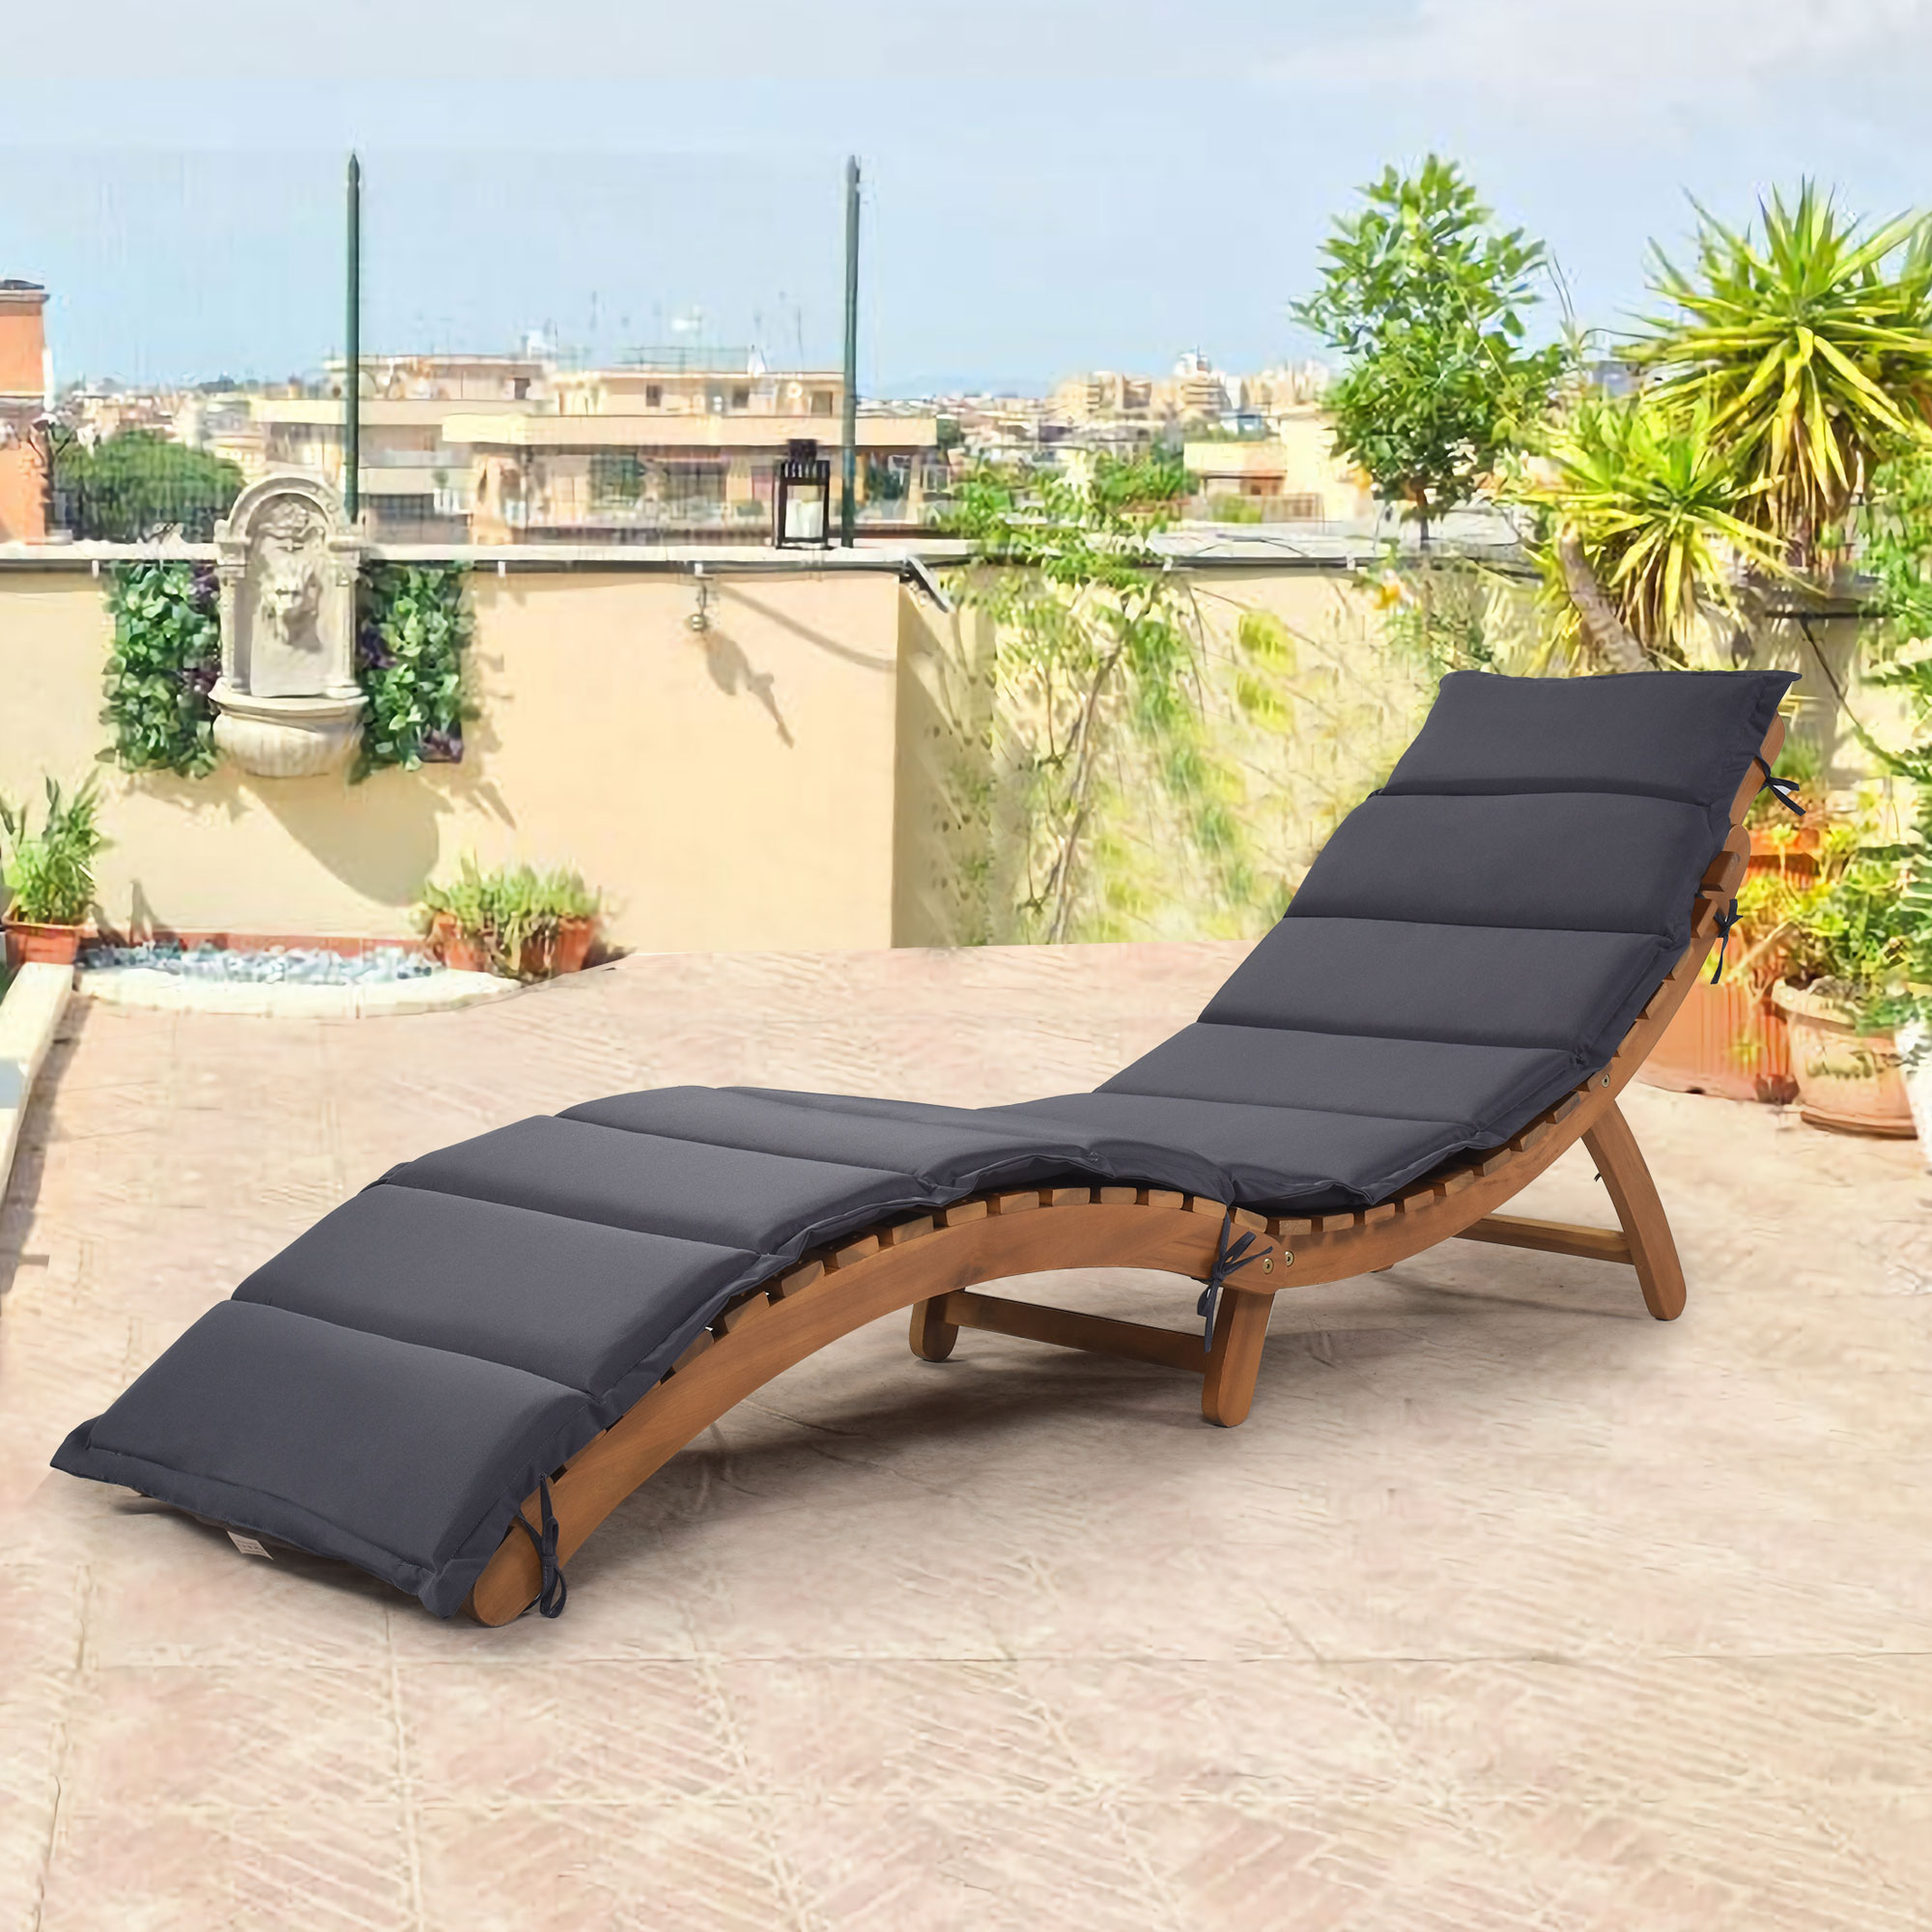 Chaise Lounge Chairs for Outside, SYNGAR 3 Piece Patio Lounge Chaise Chairs Set with Matching Table, Outdoor Extended Sun Loungers with Cushions, Wood Recliner Chairs for Yard, Poolside, Garden, D7434 - image 5 of 12